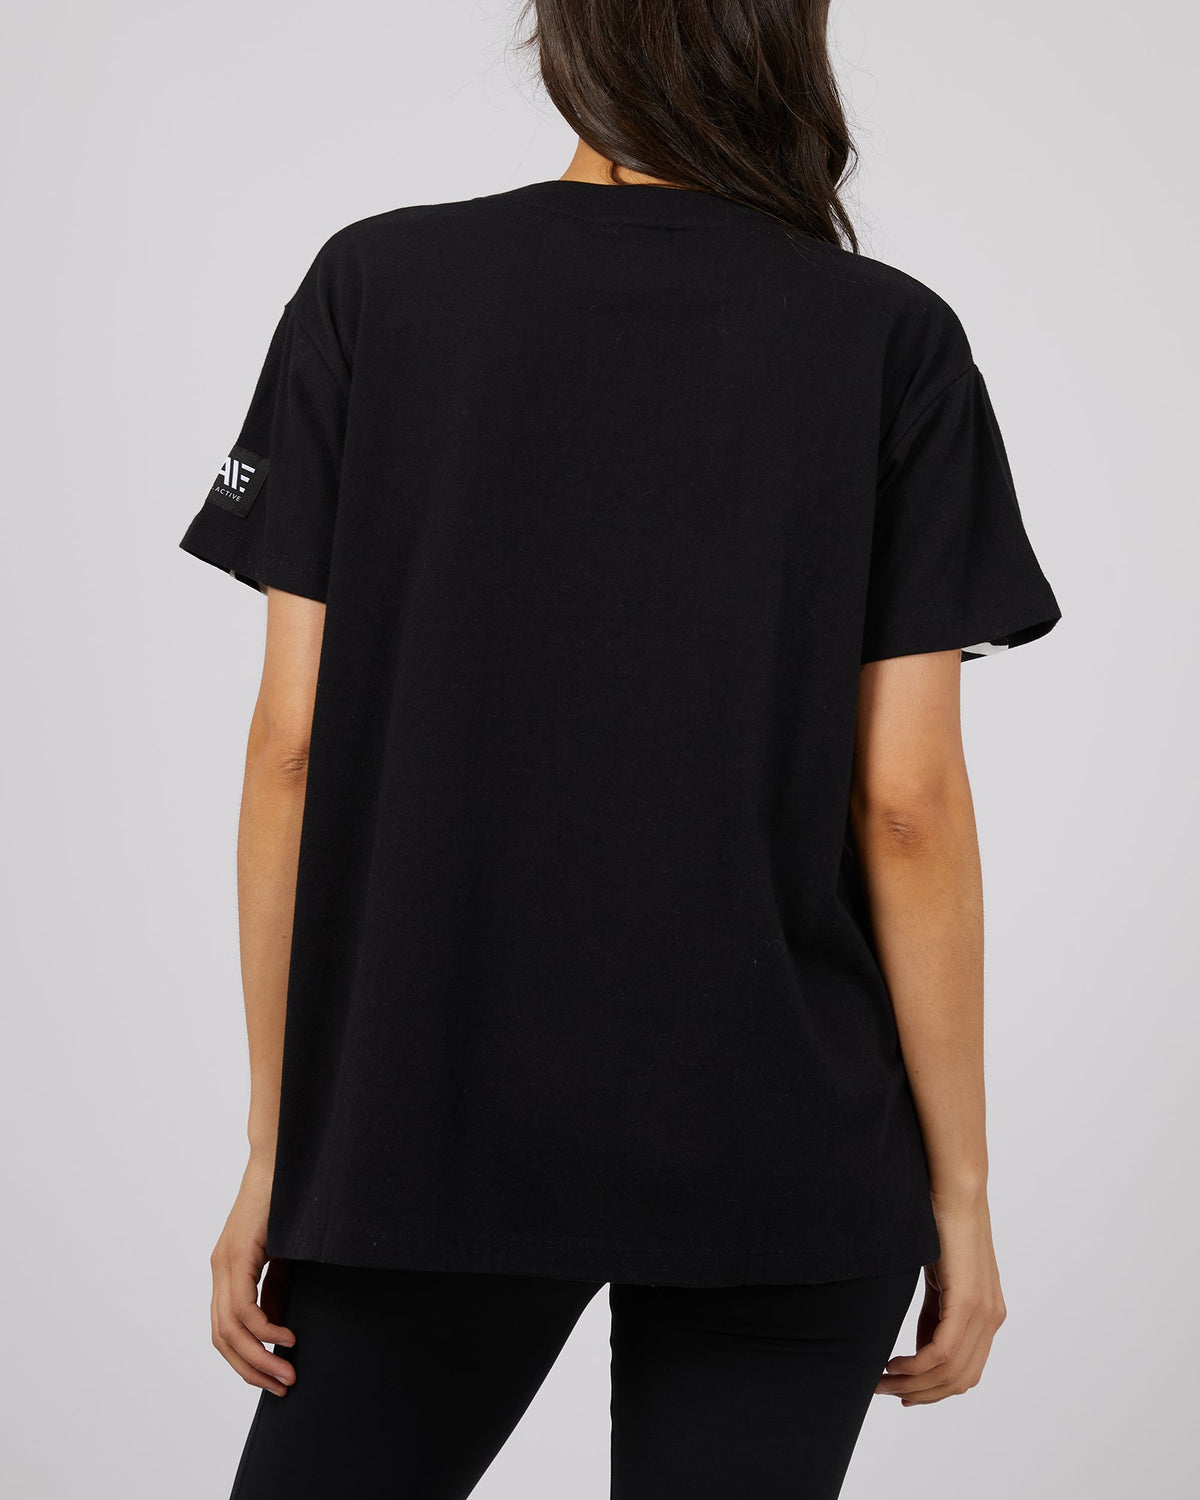 All About Eve-Parker Panelled Tee Black-Edge Clothing